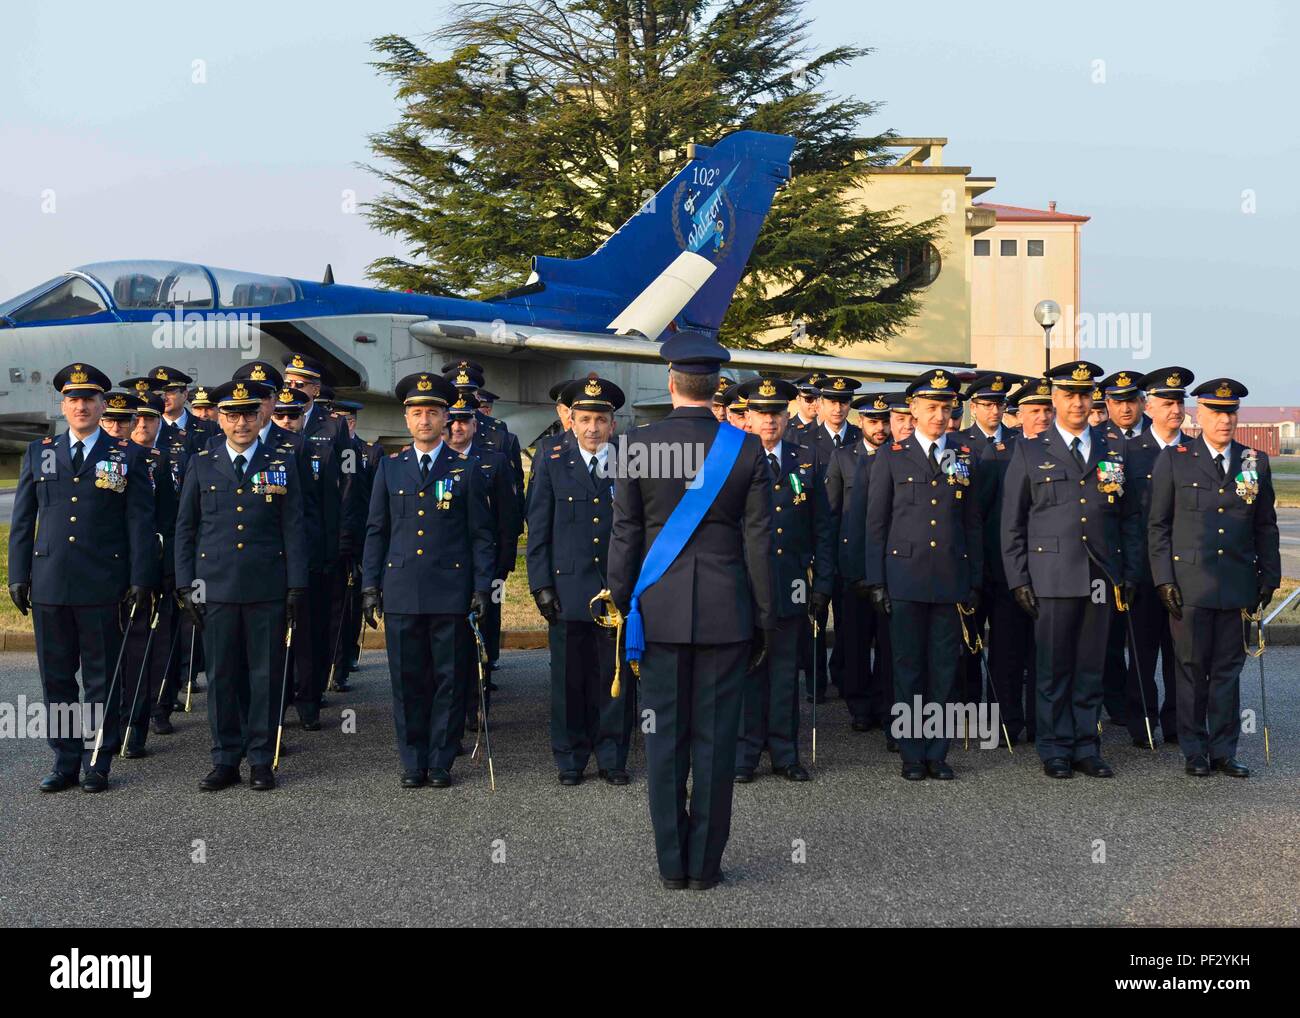 The Italian Royal Air Force was created on March 28, 1923, which became the Aeronautica Militare (Italian Air Force) later. Brig. Gen. Lance Landrum, 31st Fighter Wing commander, attended the ceremony commemorating the event. (U.S. Air Force photo by Staff Sgt. Austin Harvill) Stock Photo